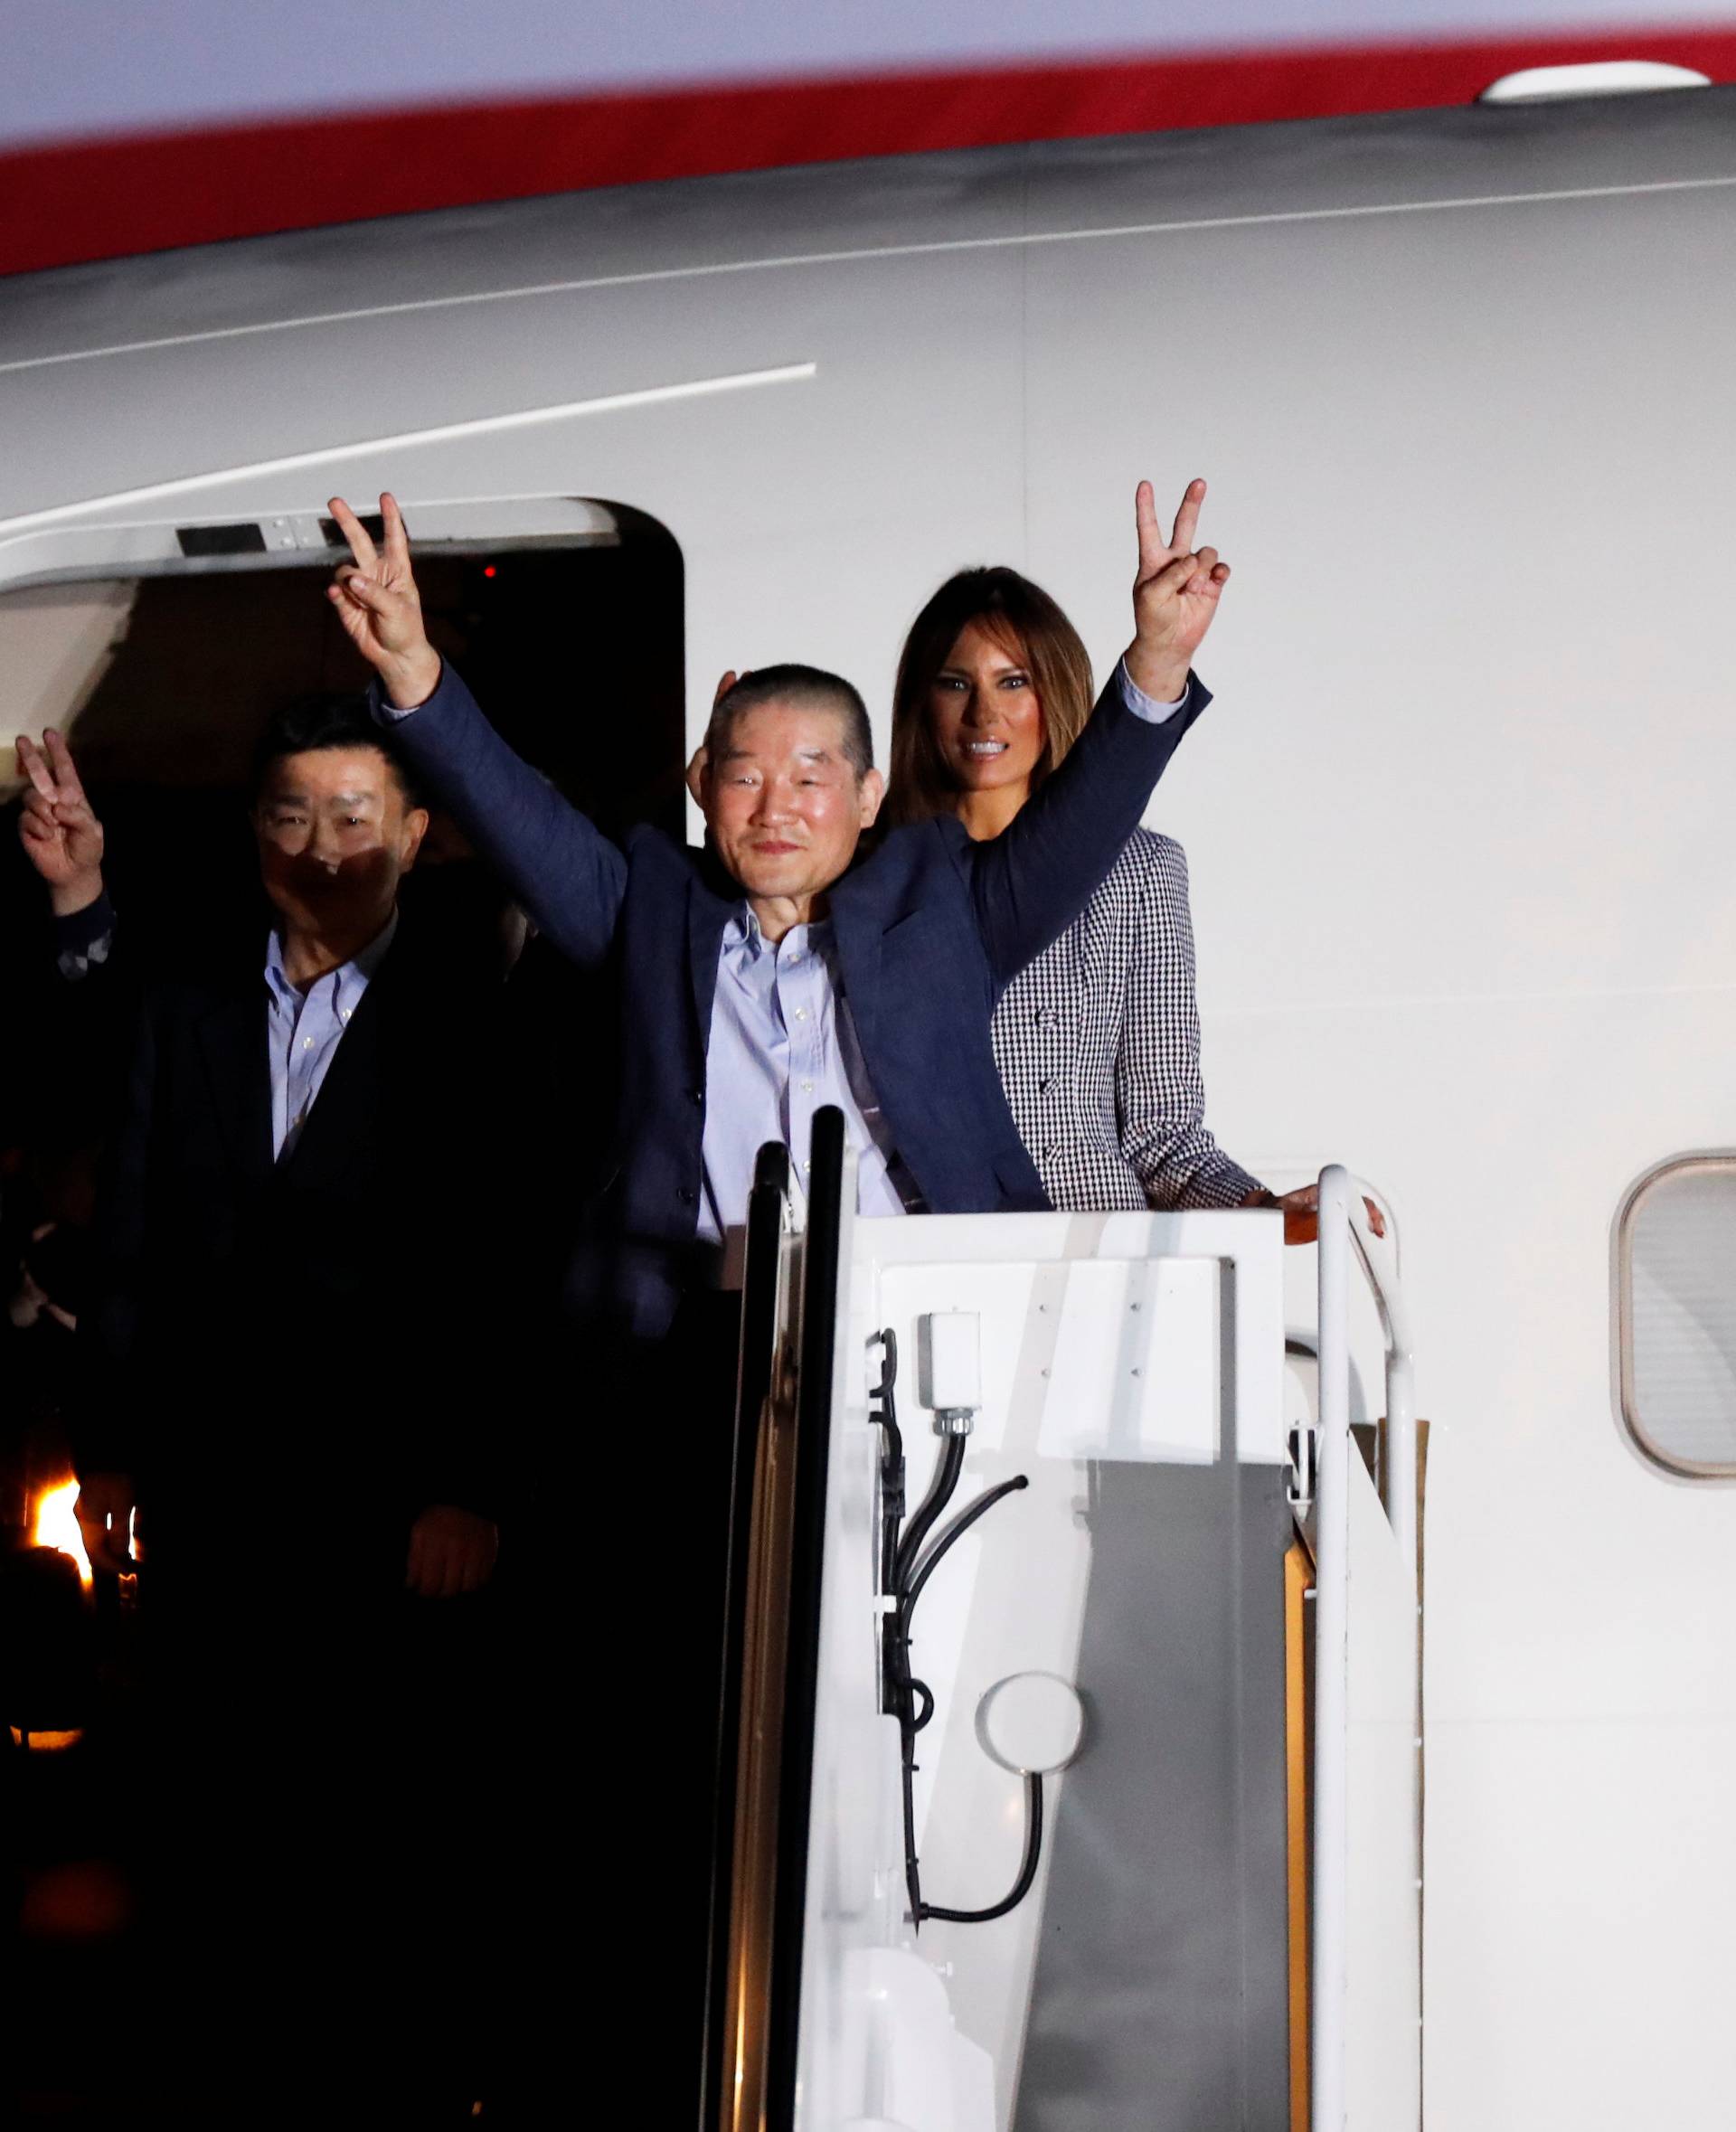 Two of the Americans formerly held hostage in North Korea gesture next to U.S.President Donald Trump and first lady Melania Trump, upon their arrival at Joint Base Andrews